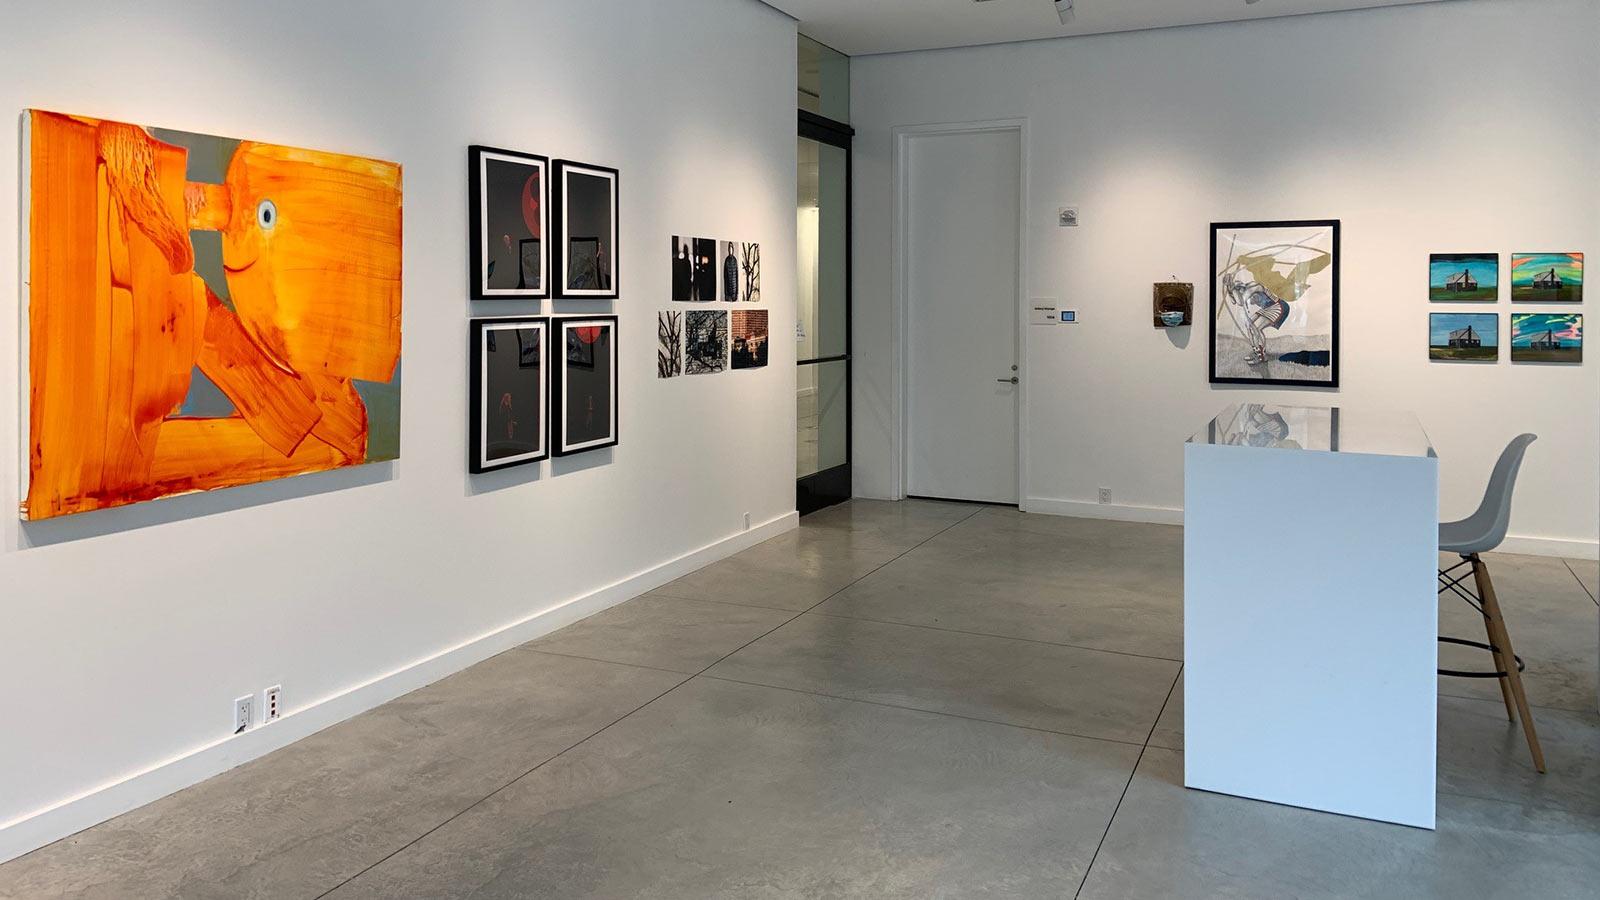 Fall 2020 Art Faculty Exhibition in the gallery